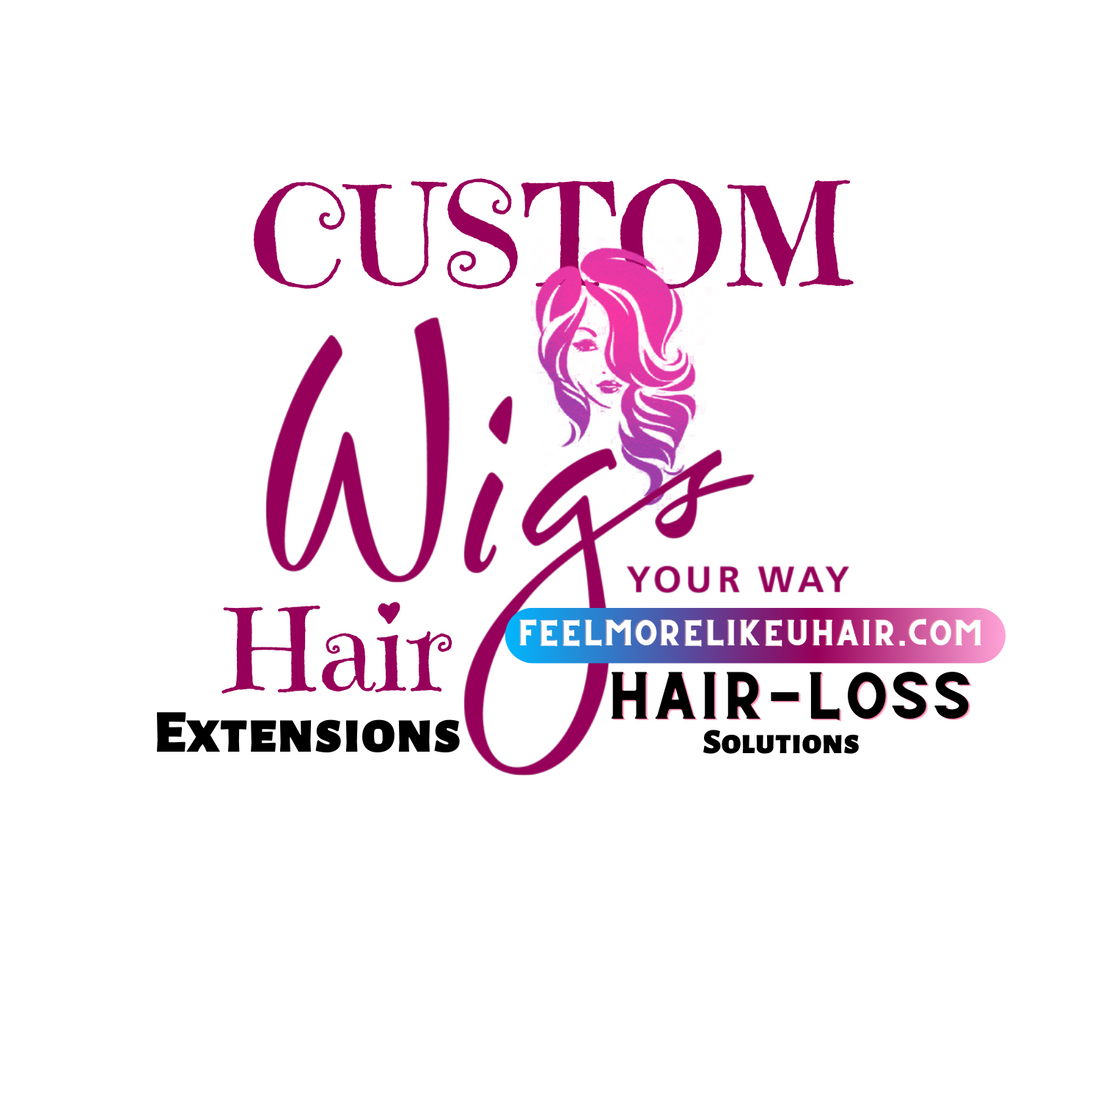 Compare Custom Hair Systems with Fit Custom Ready-to-Wear